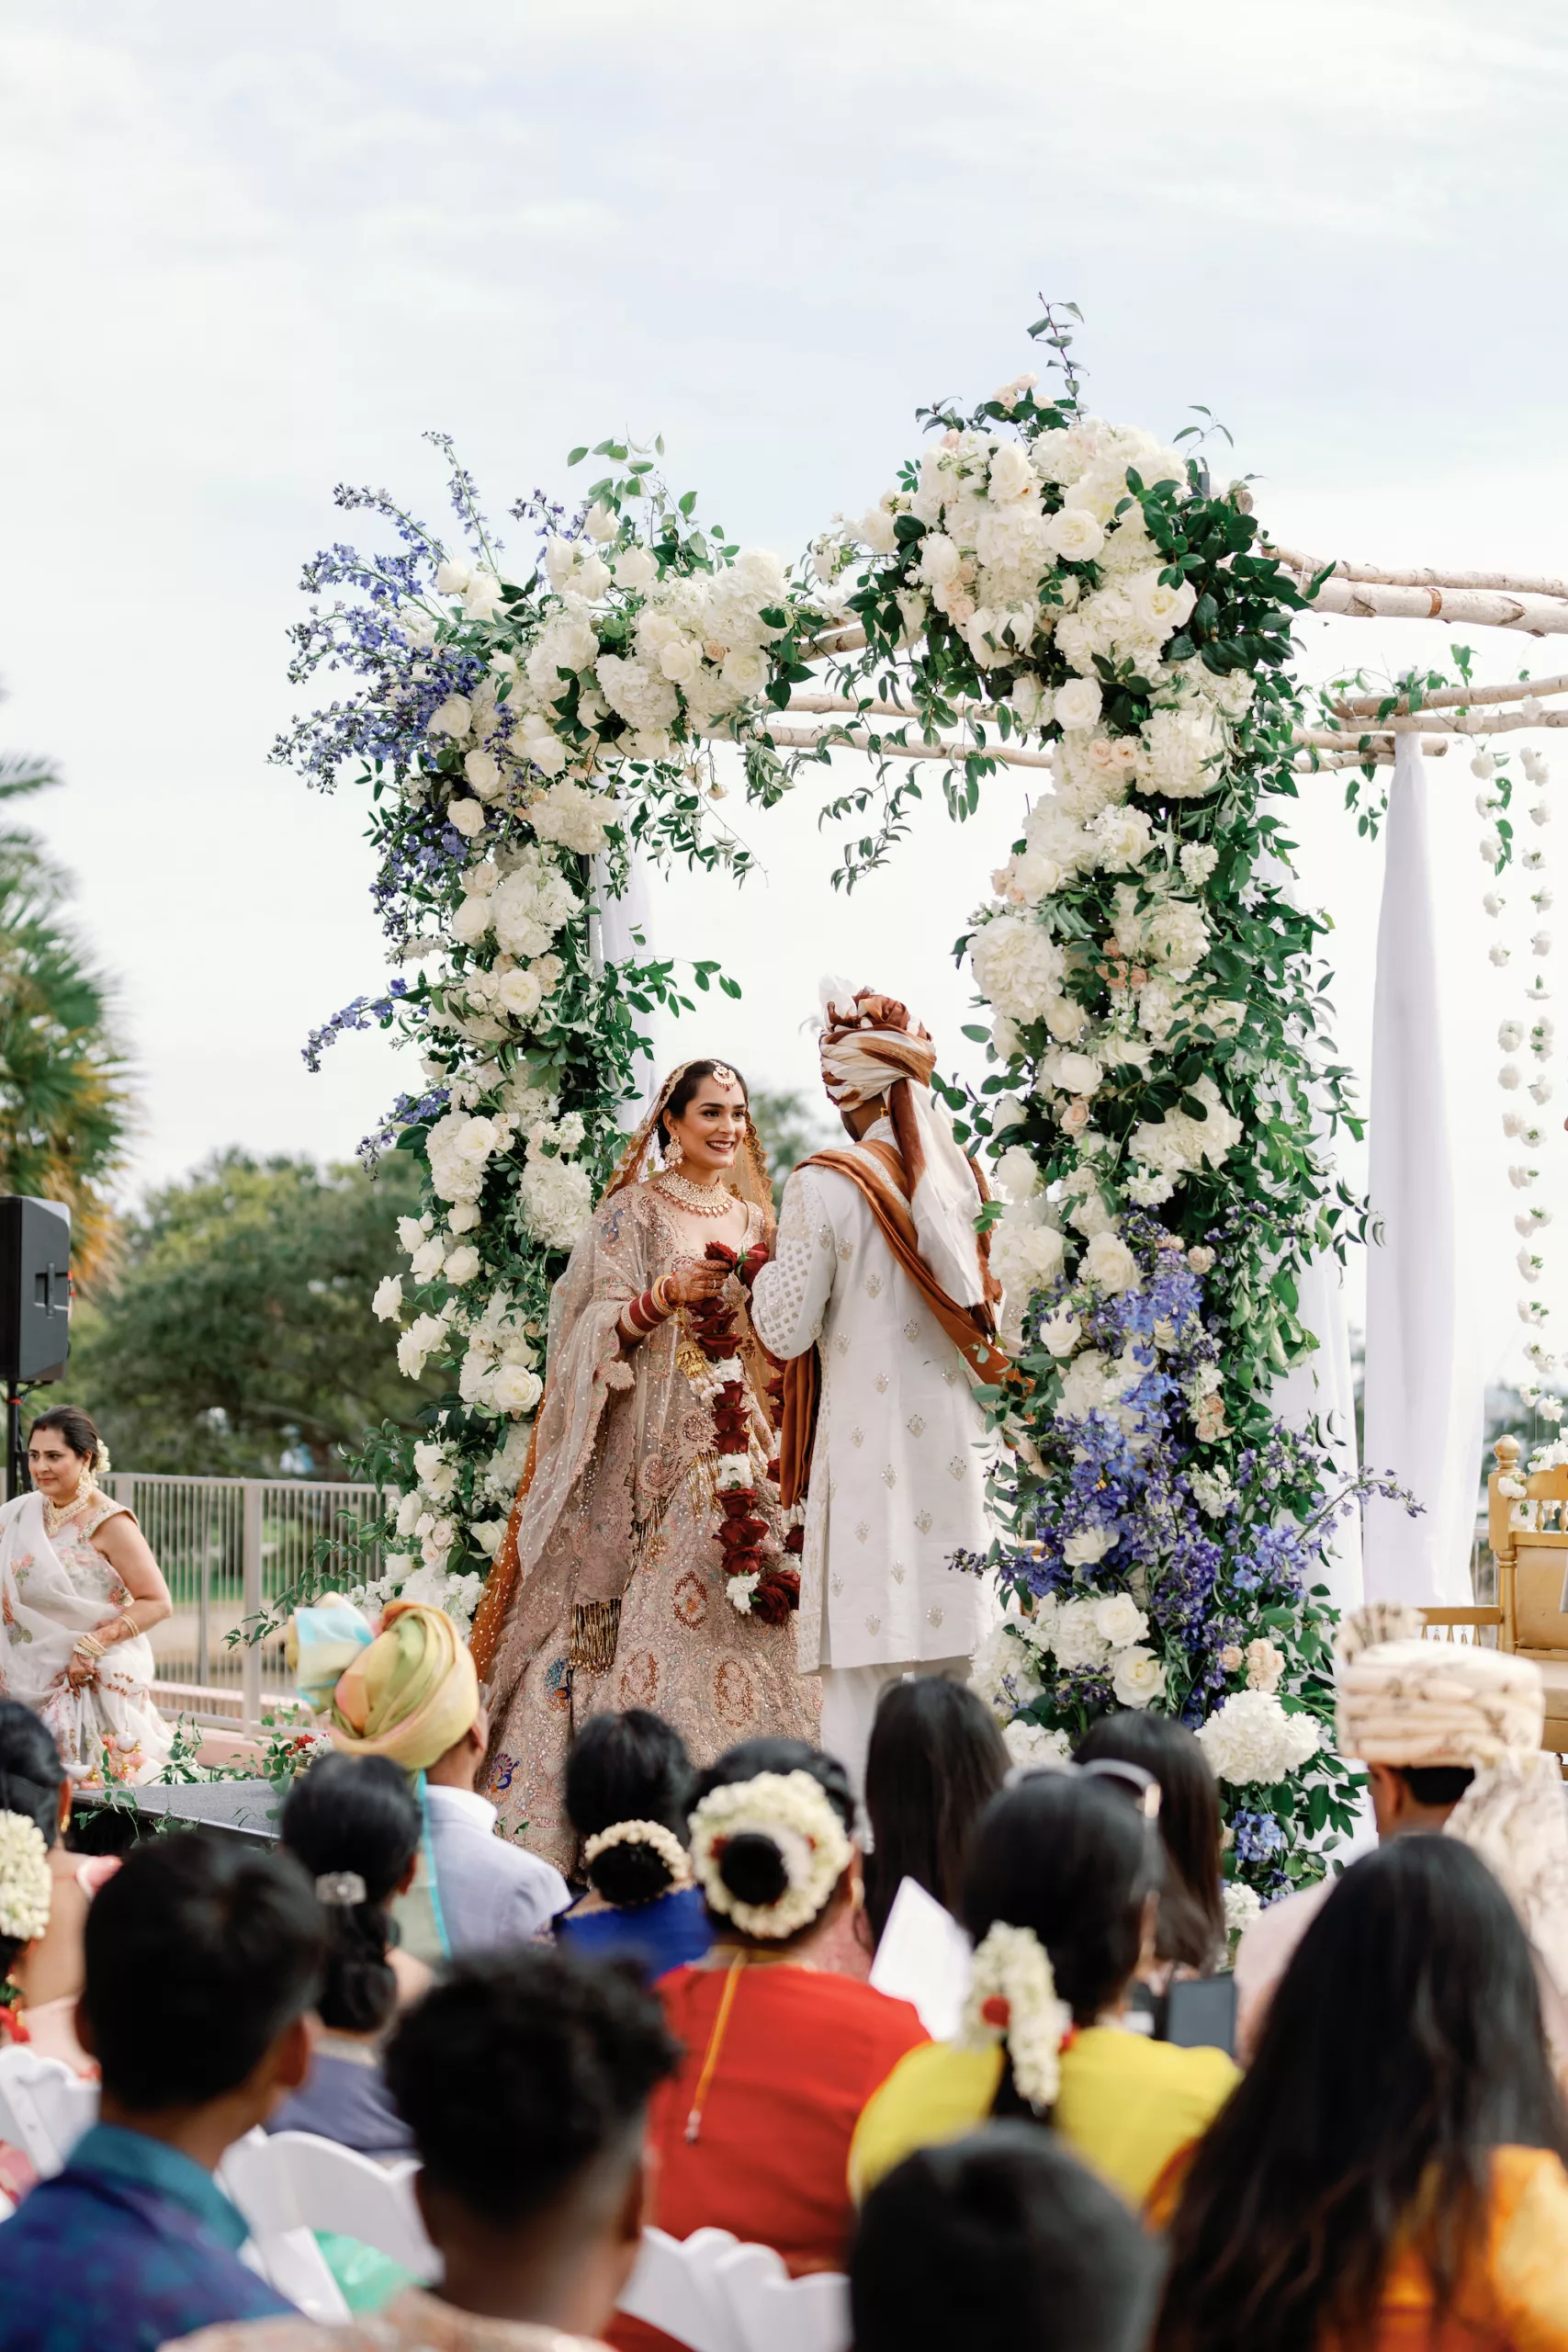 Bride and Groom Hindu Indian Wedding Ceremony Decor Ideas | Elegant Floral Arch with White Roses, Hydrangeas, and Greenery Flower Arrangement Inspiration